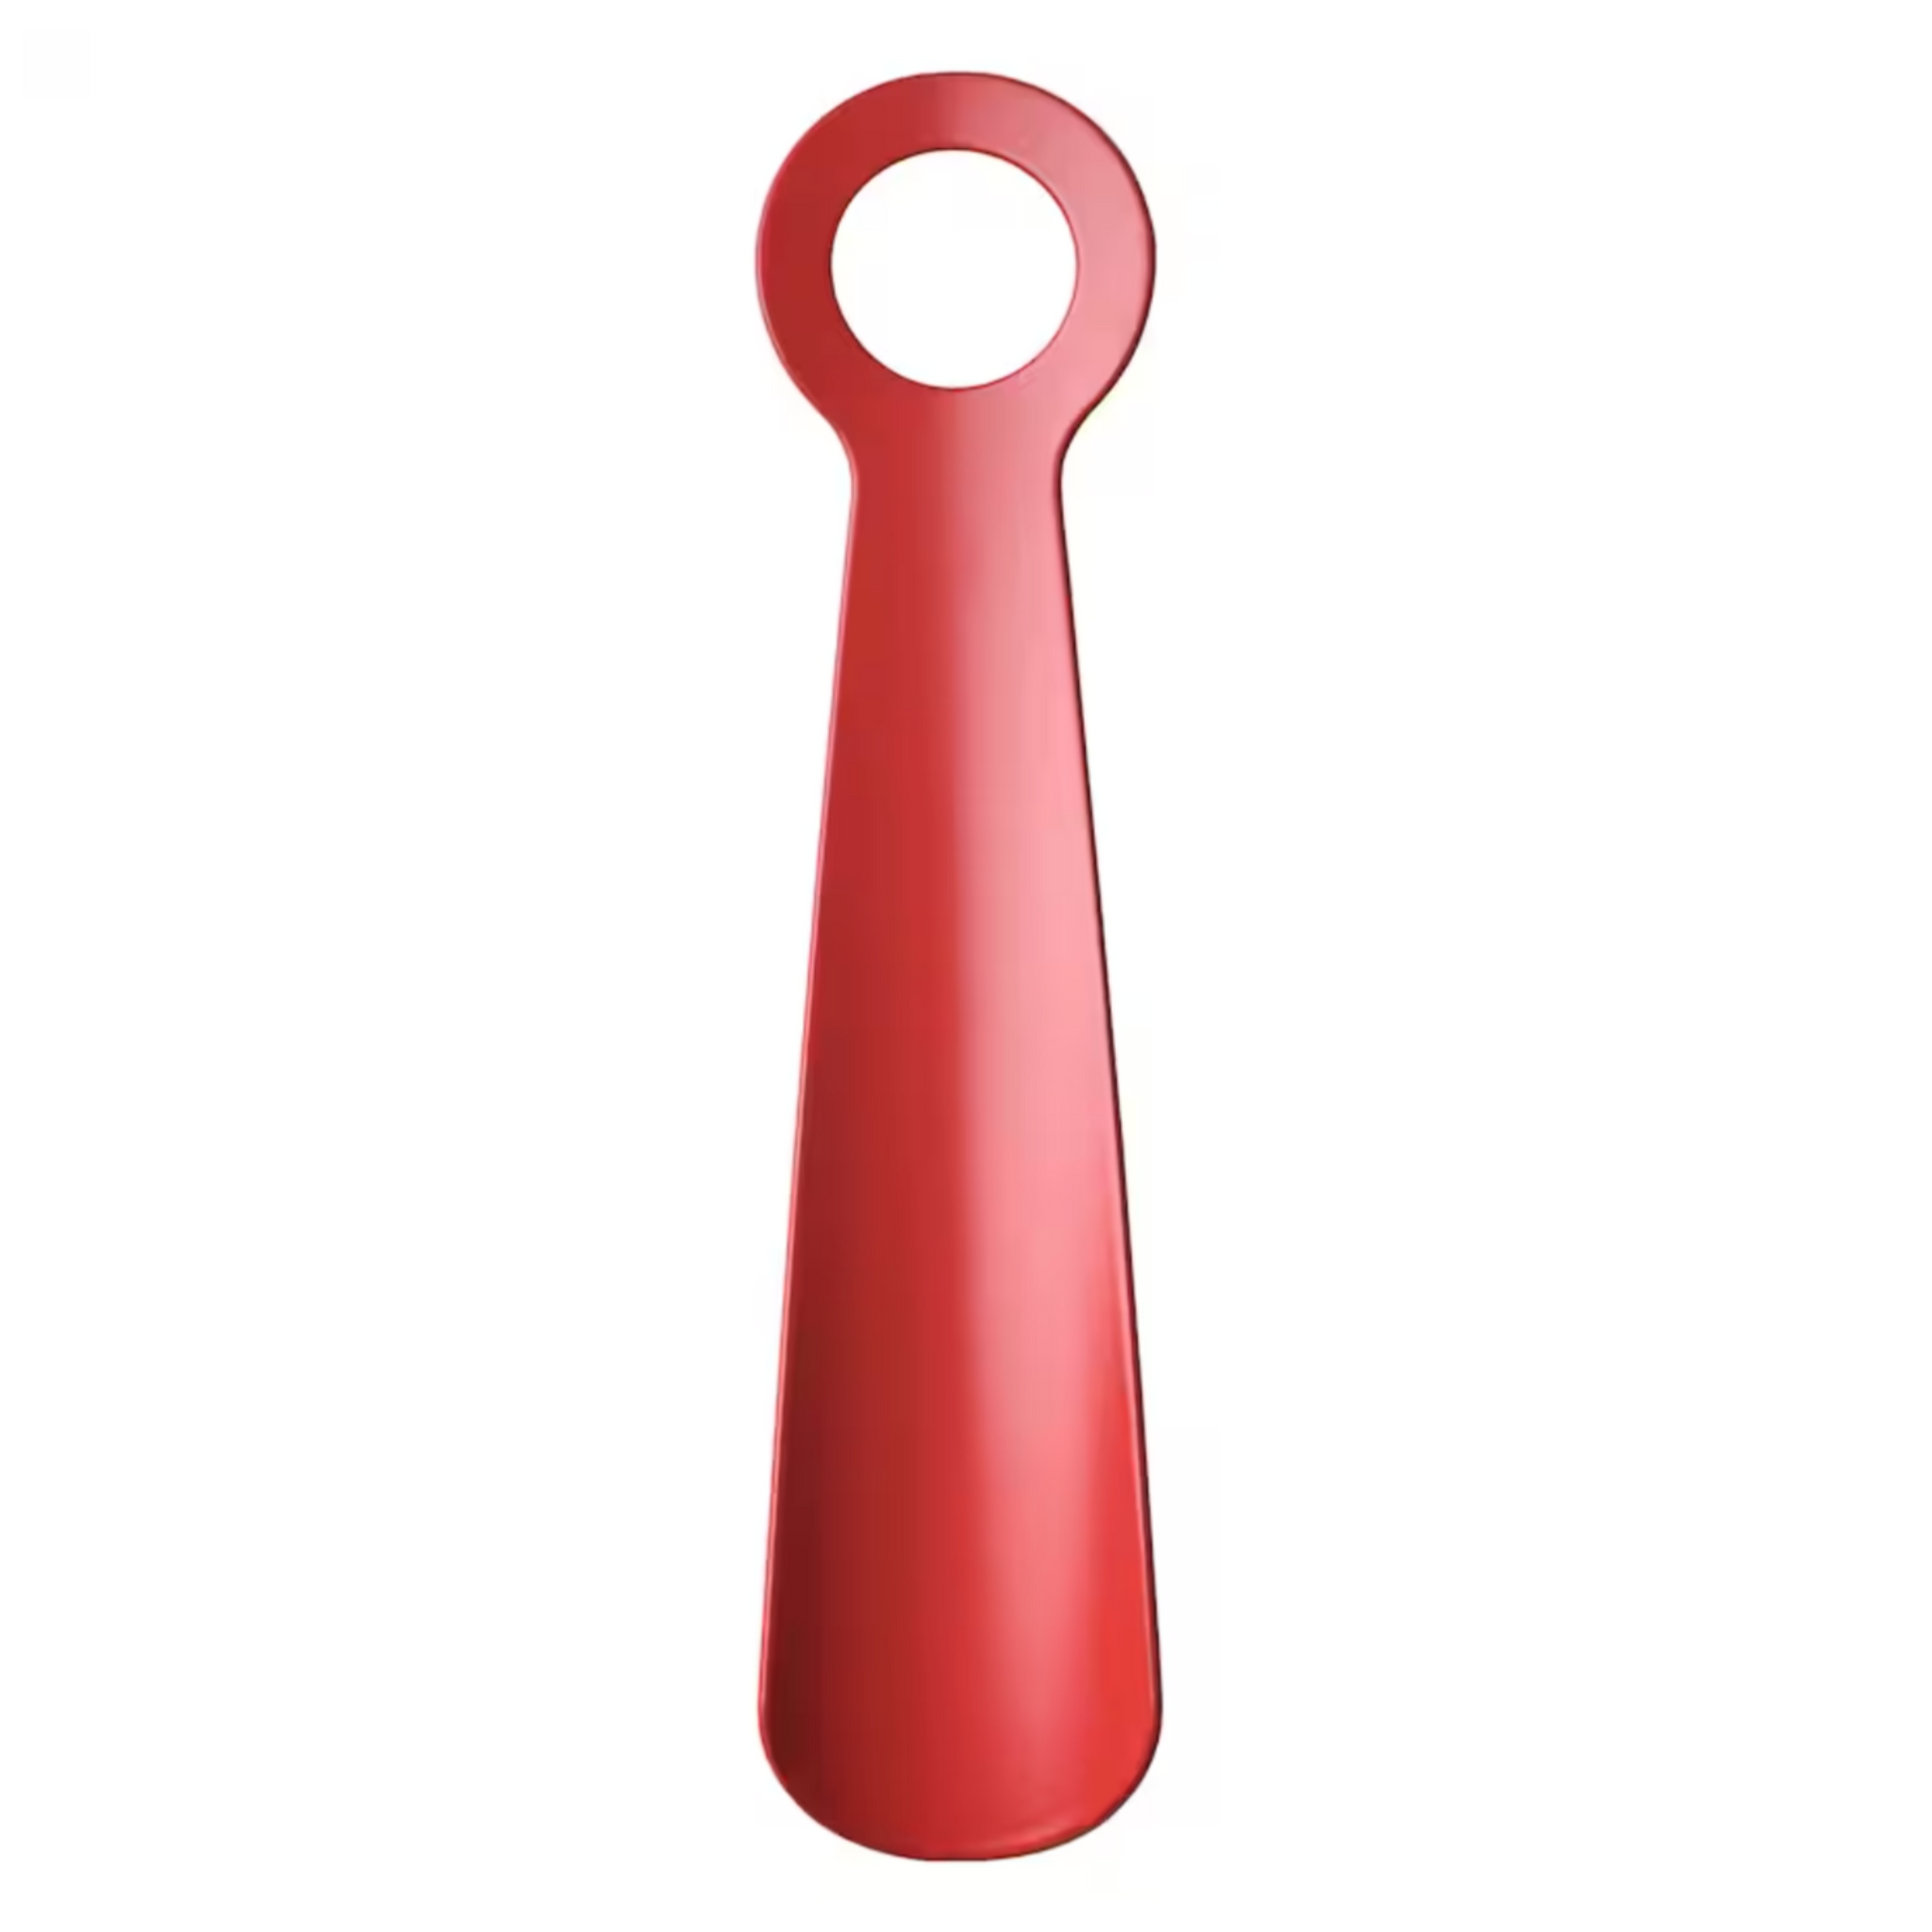 Ikea Snoskyffel, Shoehorn, Bright Red, 18cm (8254343315743)